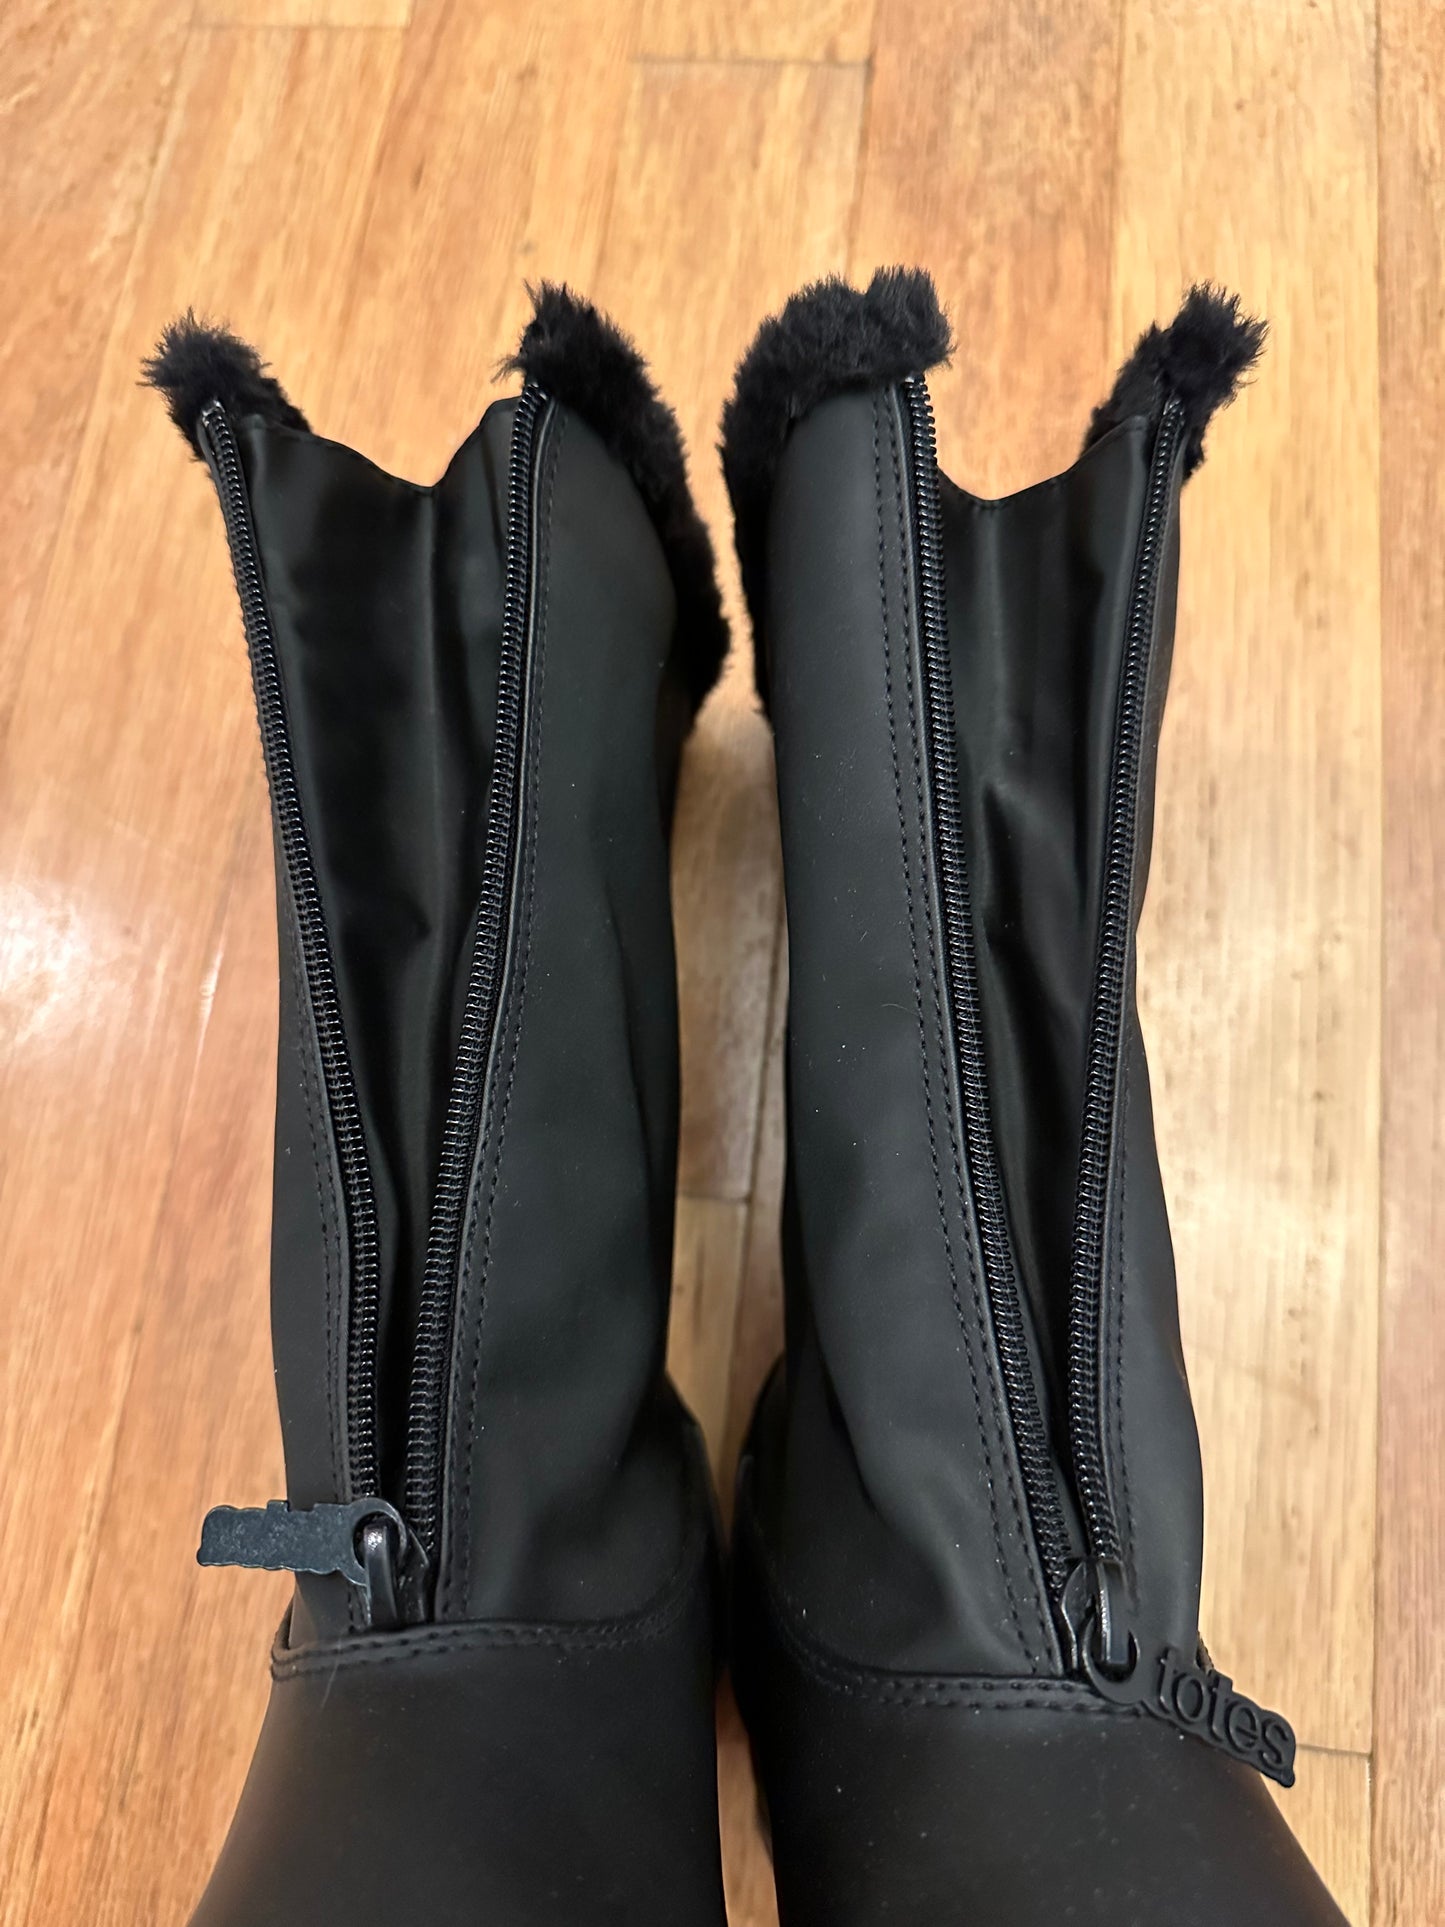 Totes Waterproof Boots size 7